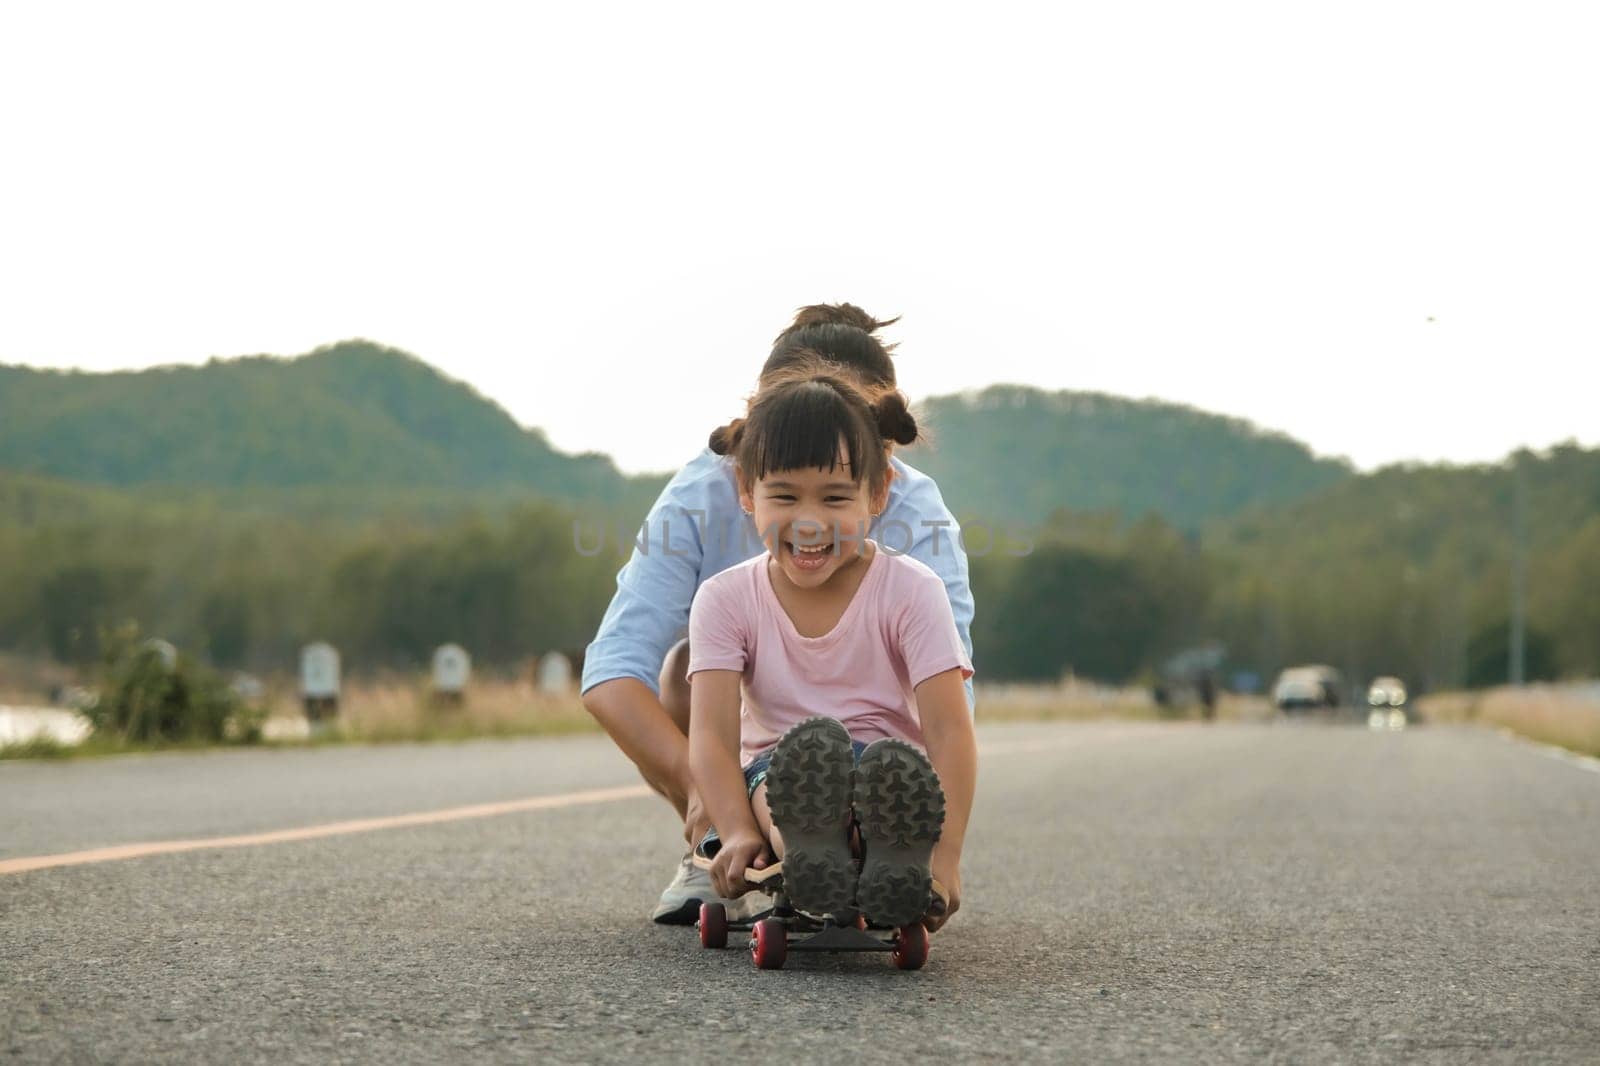 Mother teaching her daughter how to skateboard in the park. Child riding skate board. Healthy sports and outdoor activities for school children in the summer. by TEERASAK